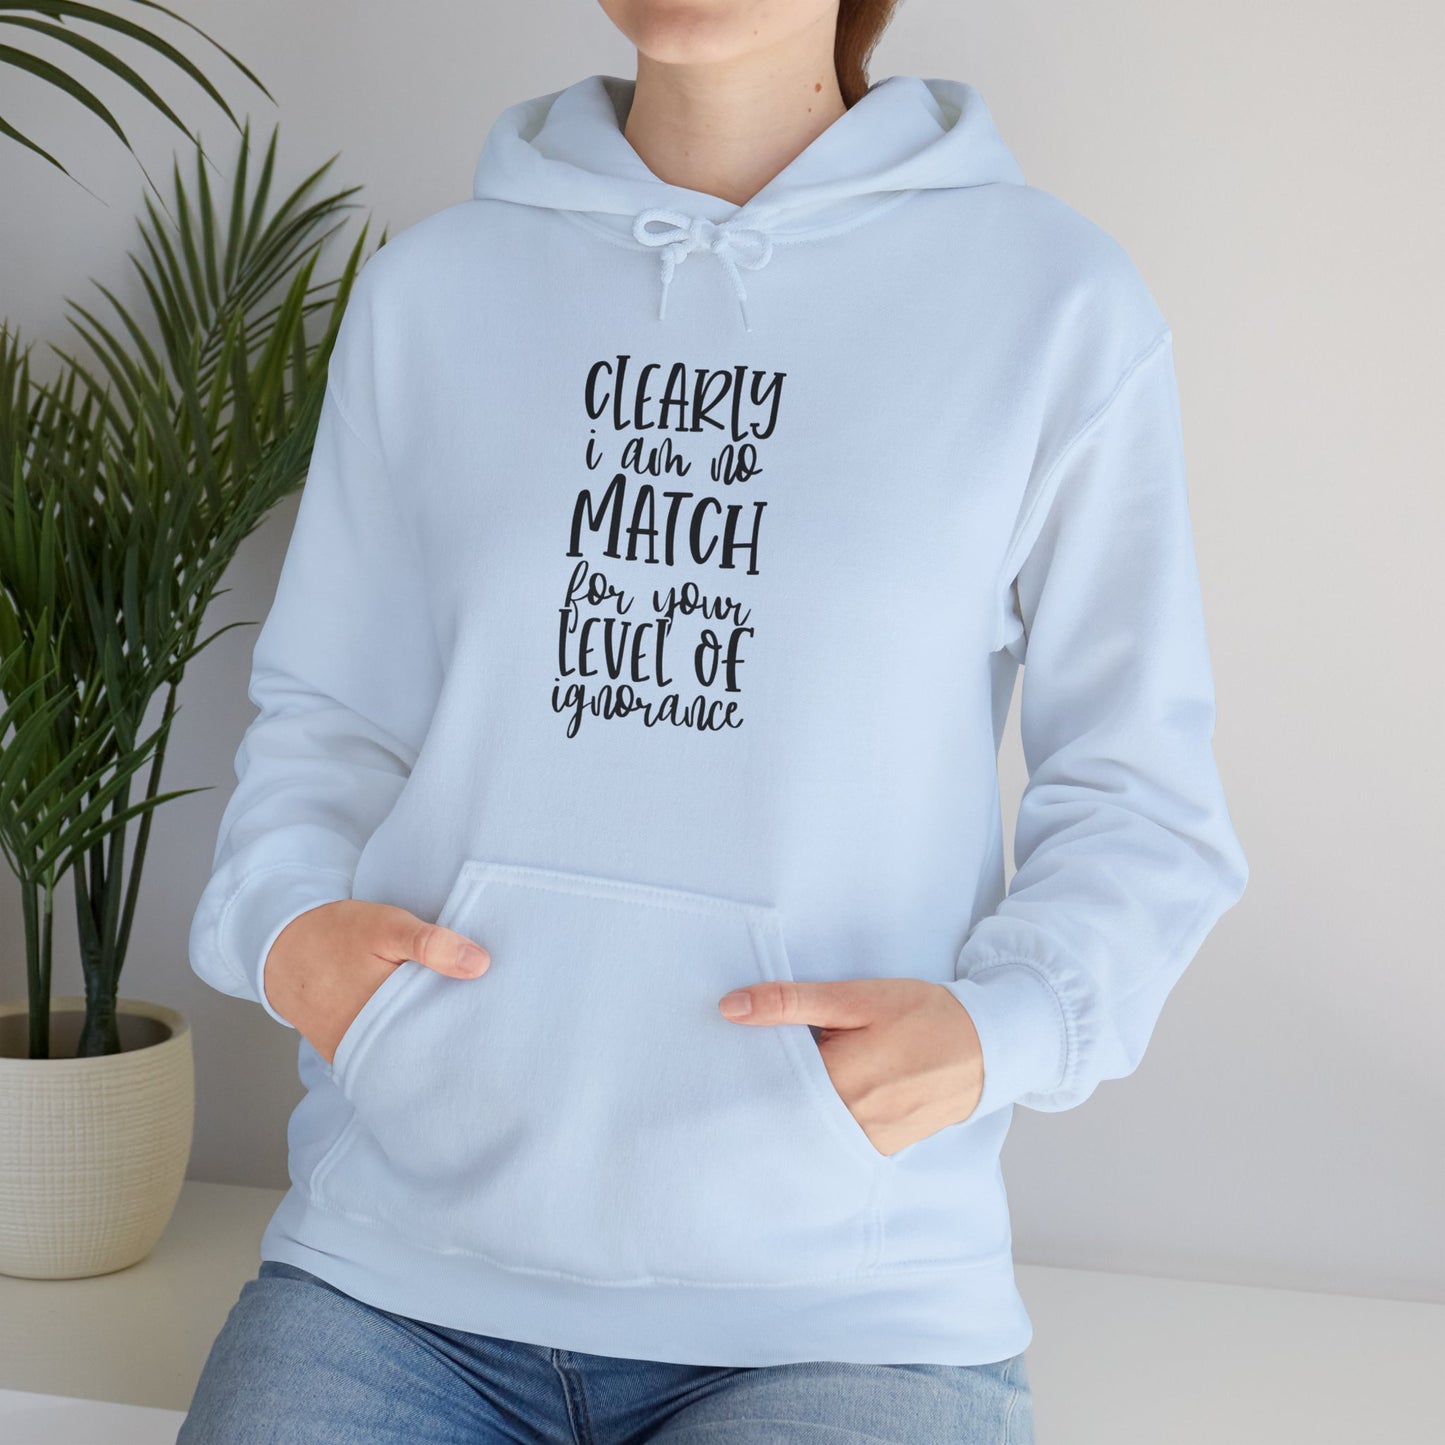 Clearly I Am No Match Unisex Heavy Blend™ Hooded Sweatshirt